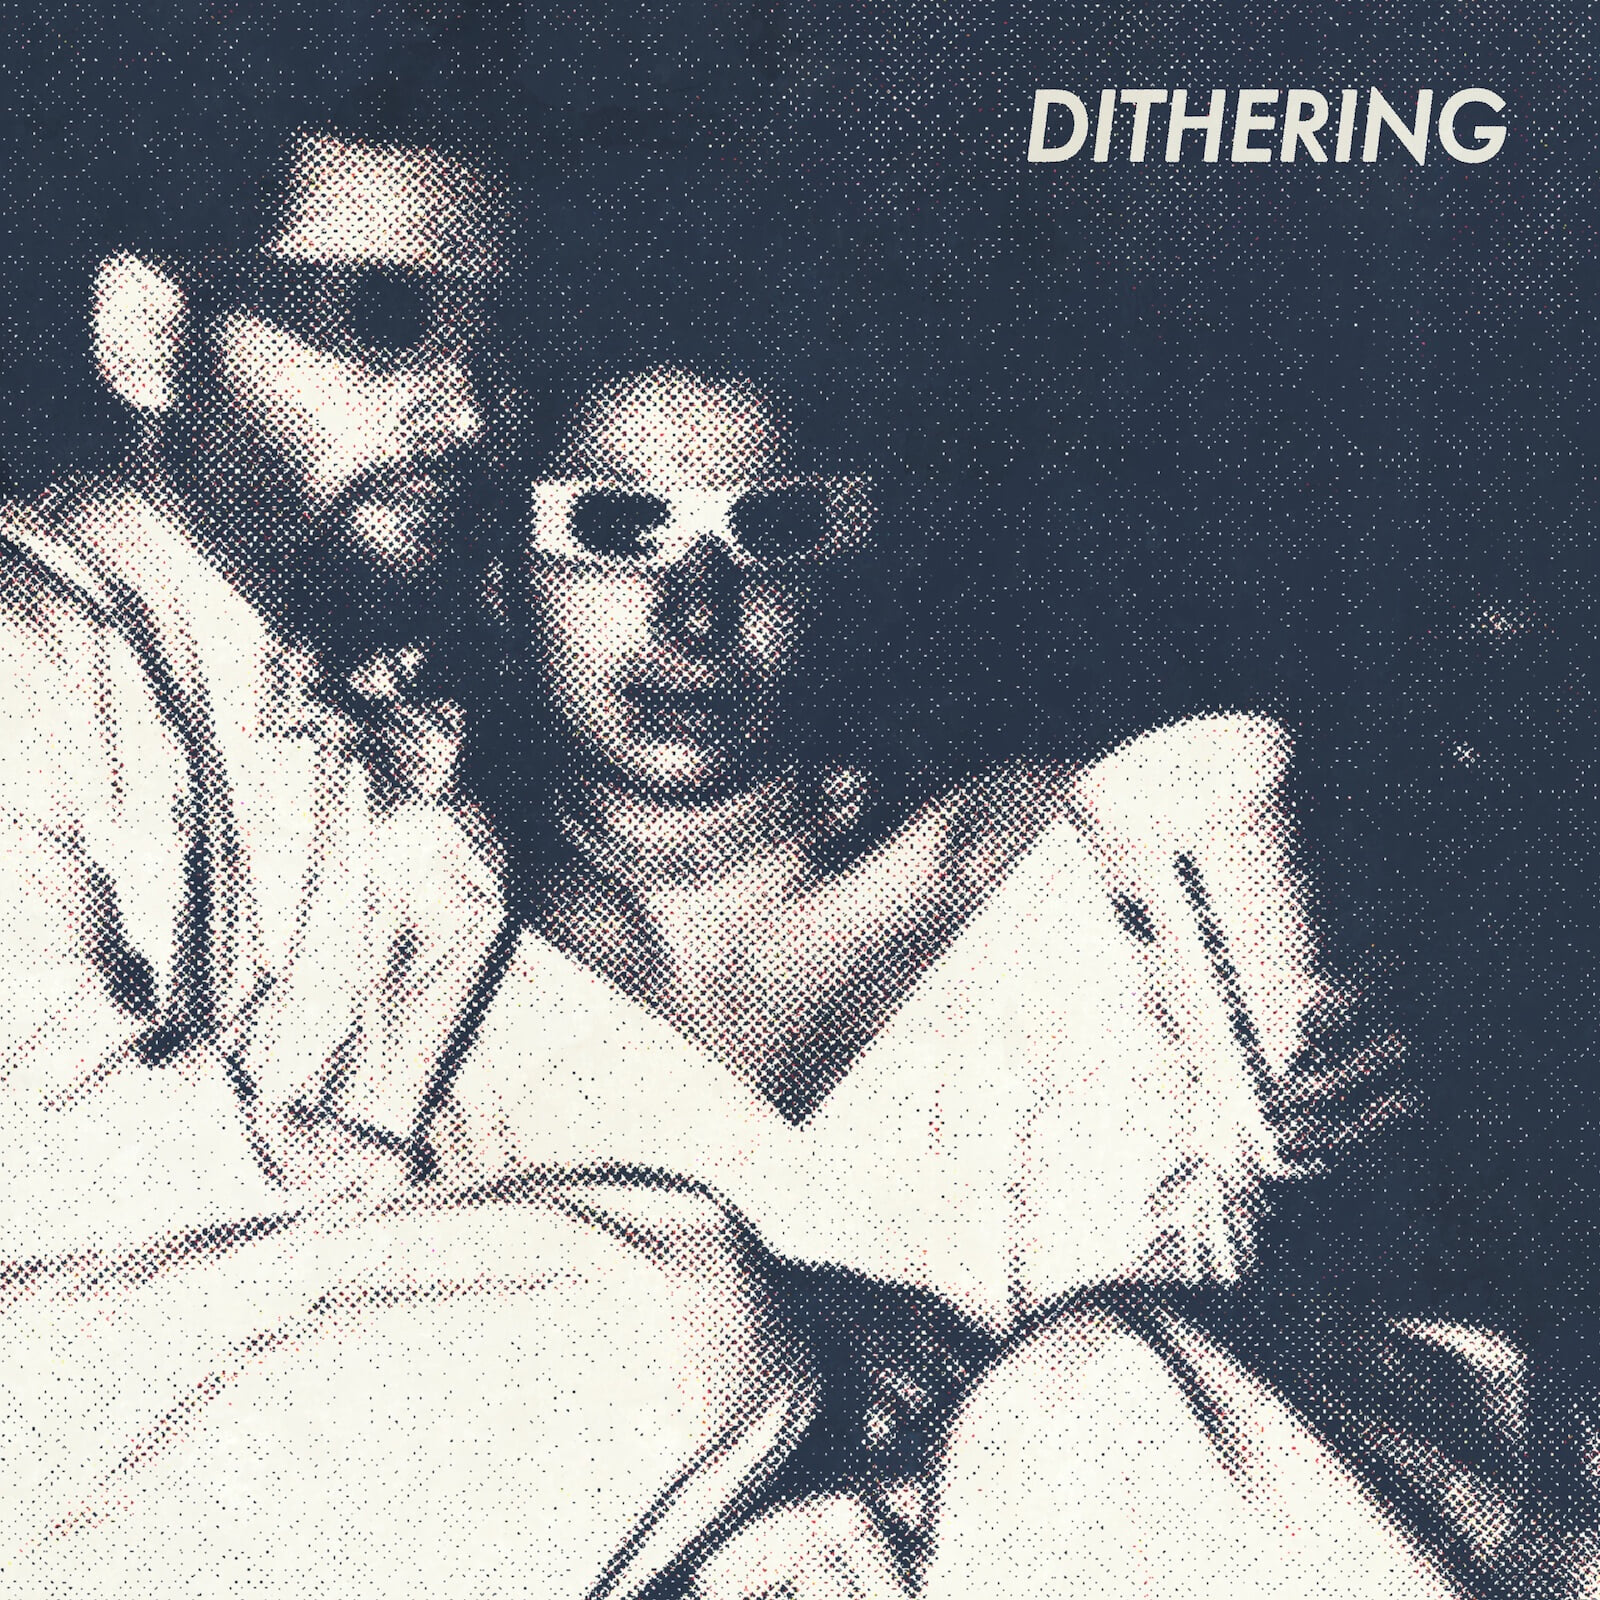 June 2023 cover art for Dithering, depicting a couple cuddling in a movie theater while wearing 3D glasses.